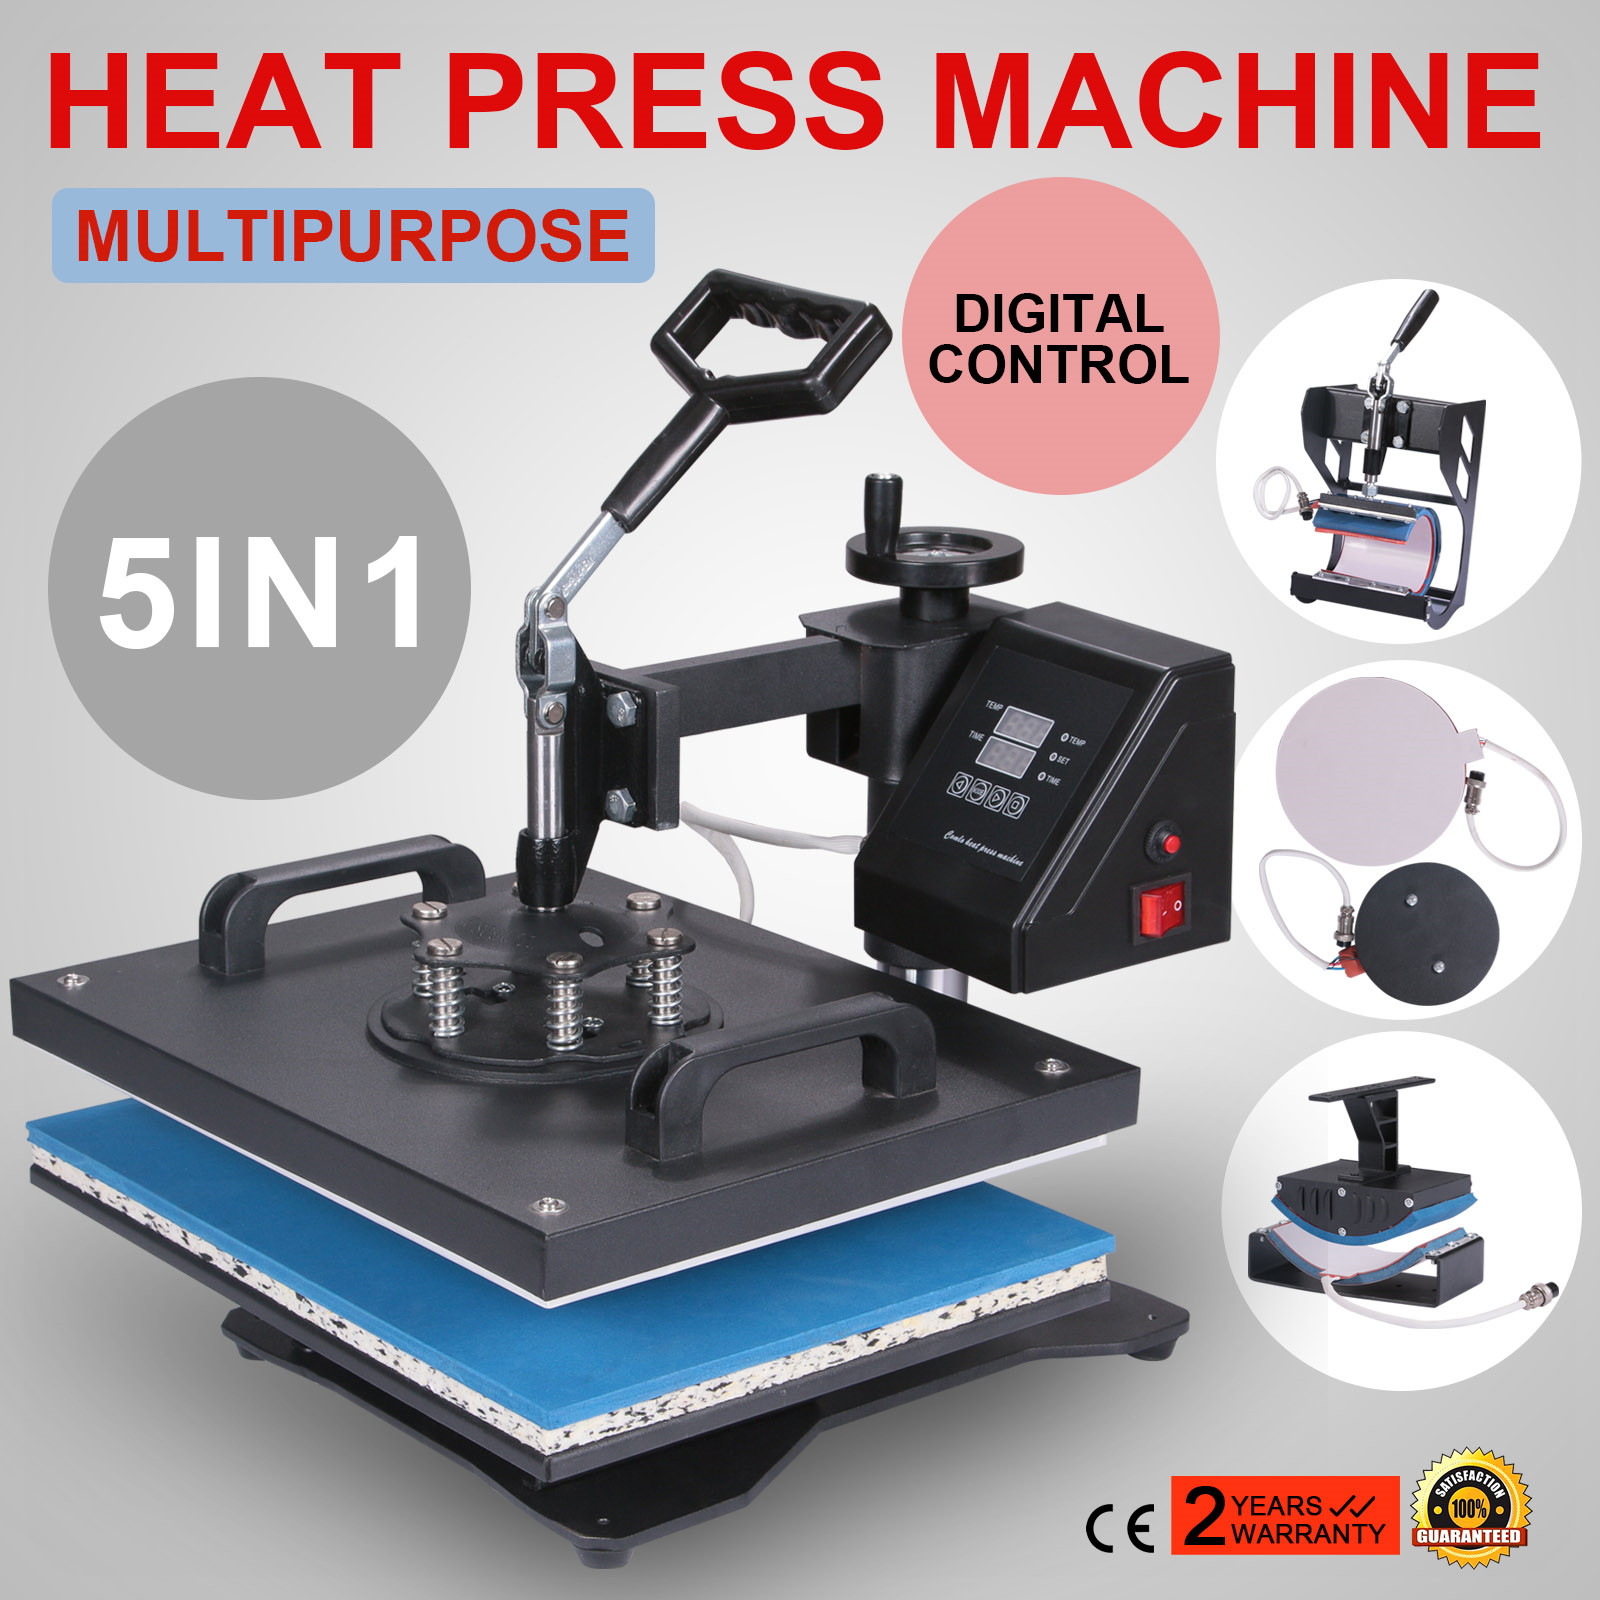 Heat Press Hat Press Heat Press Machine for T Shirts Cup Mug 5 in 1 Multifunctional Transfer Sublimation T Shirt P